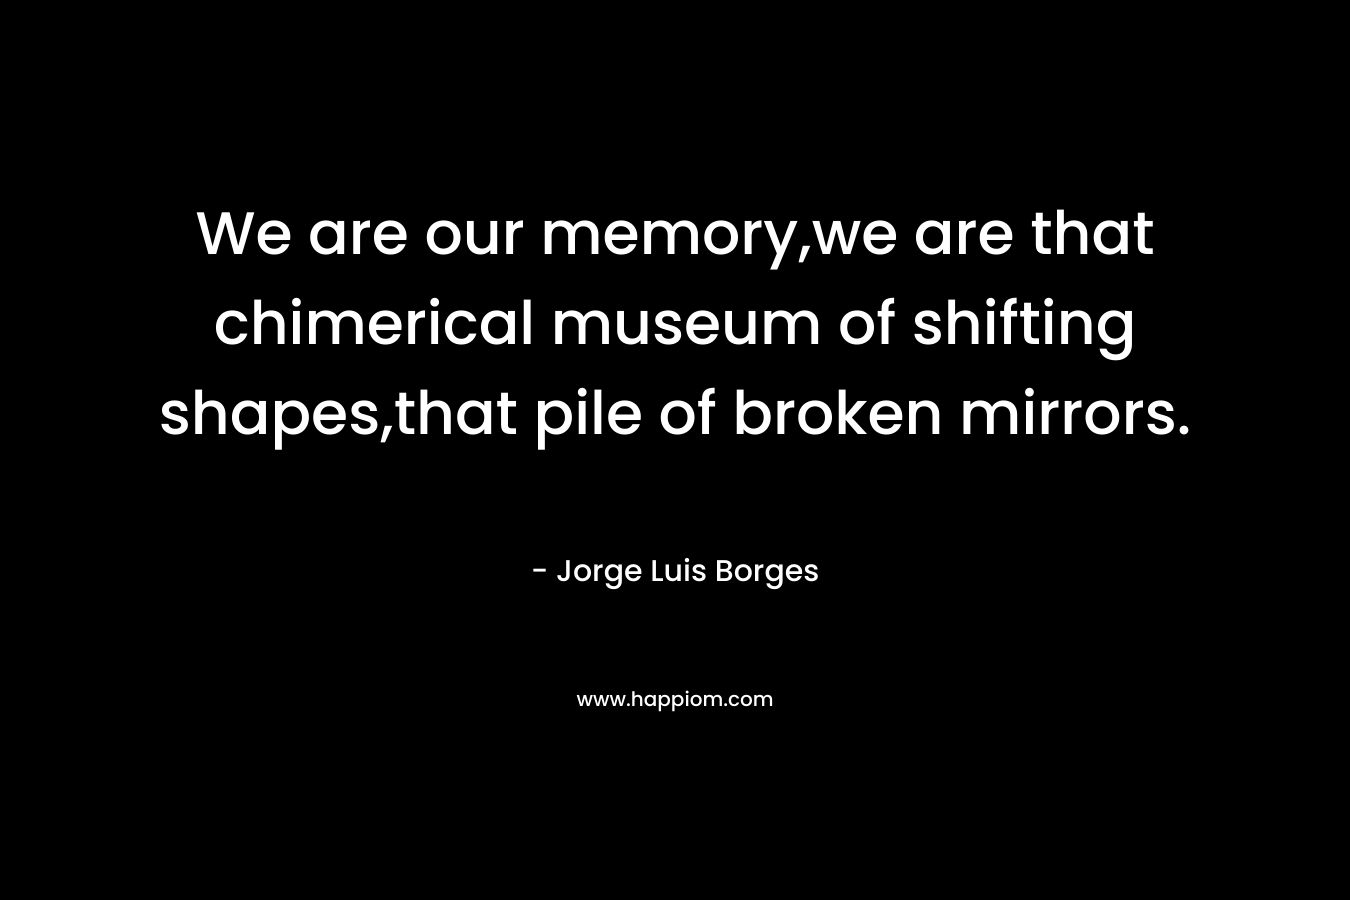 We are our memory,we are that chimerical museum of shifting shapes,that pile of broken mirrors. – Jorge Luis Borges